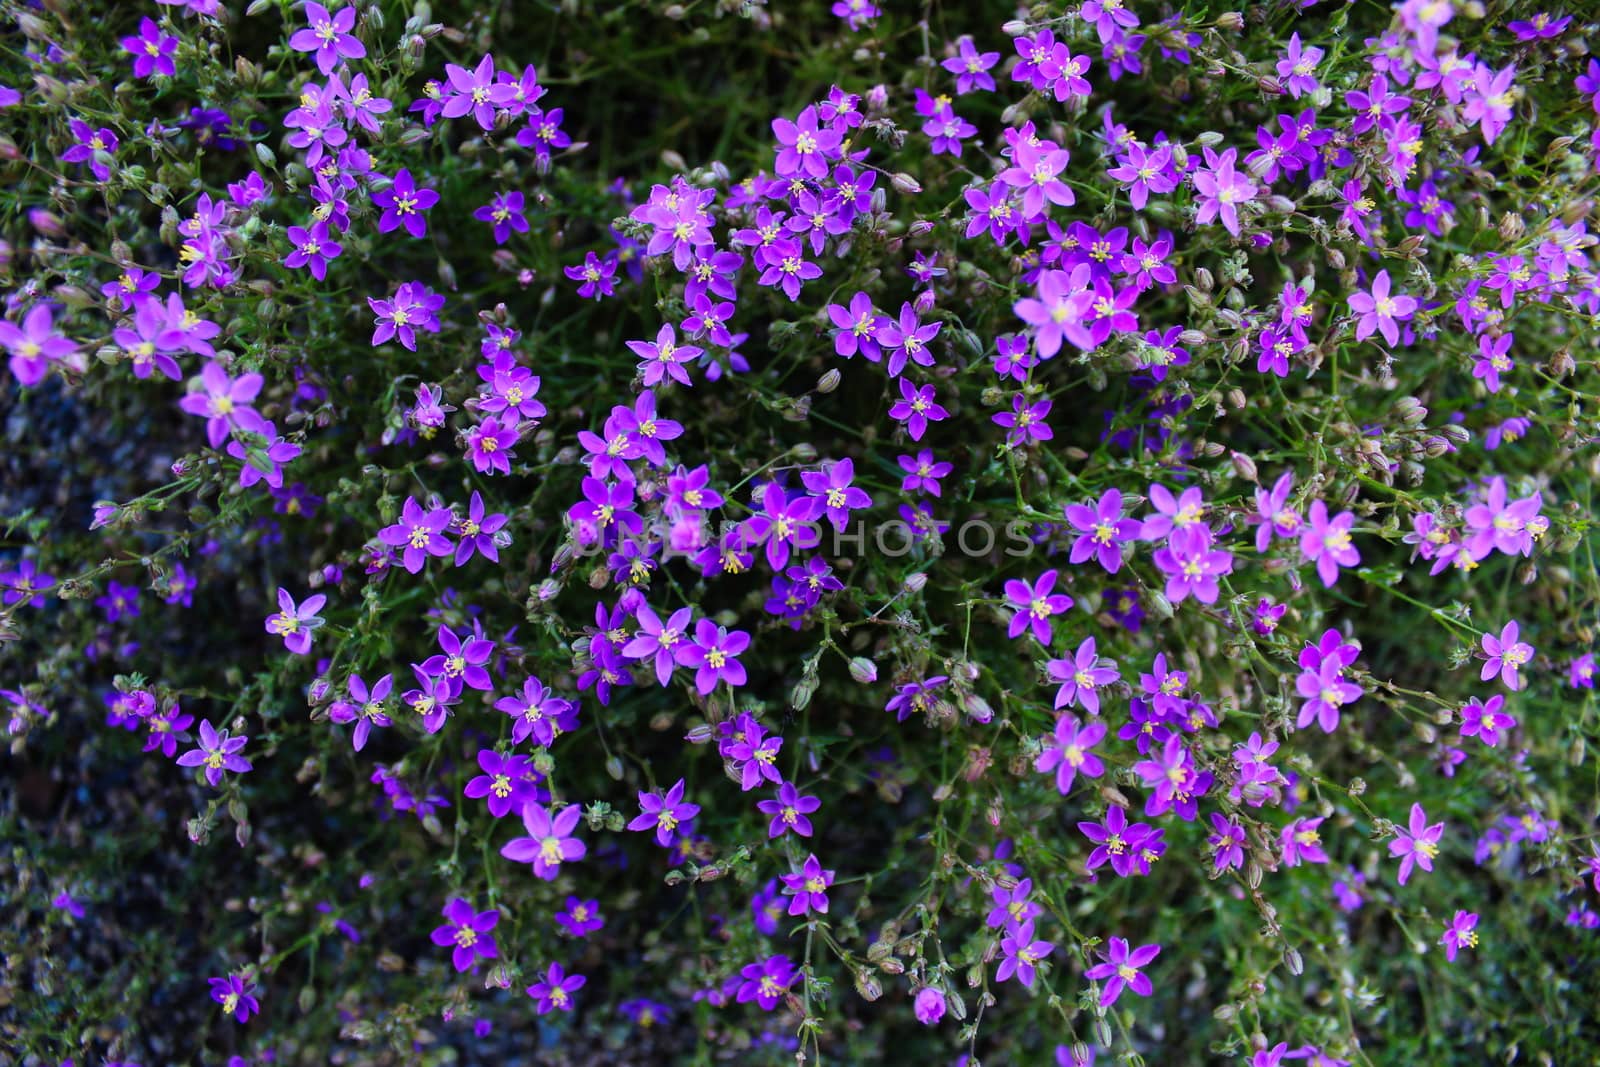 Wallpaper. Lots of small invasive purple flowers in one place. Beja, Portugal.